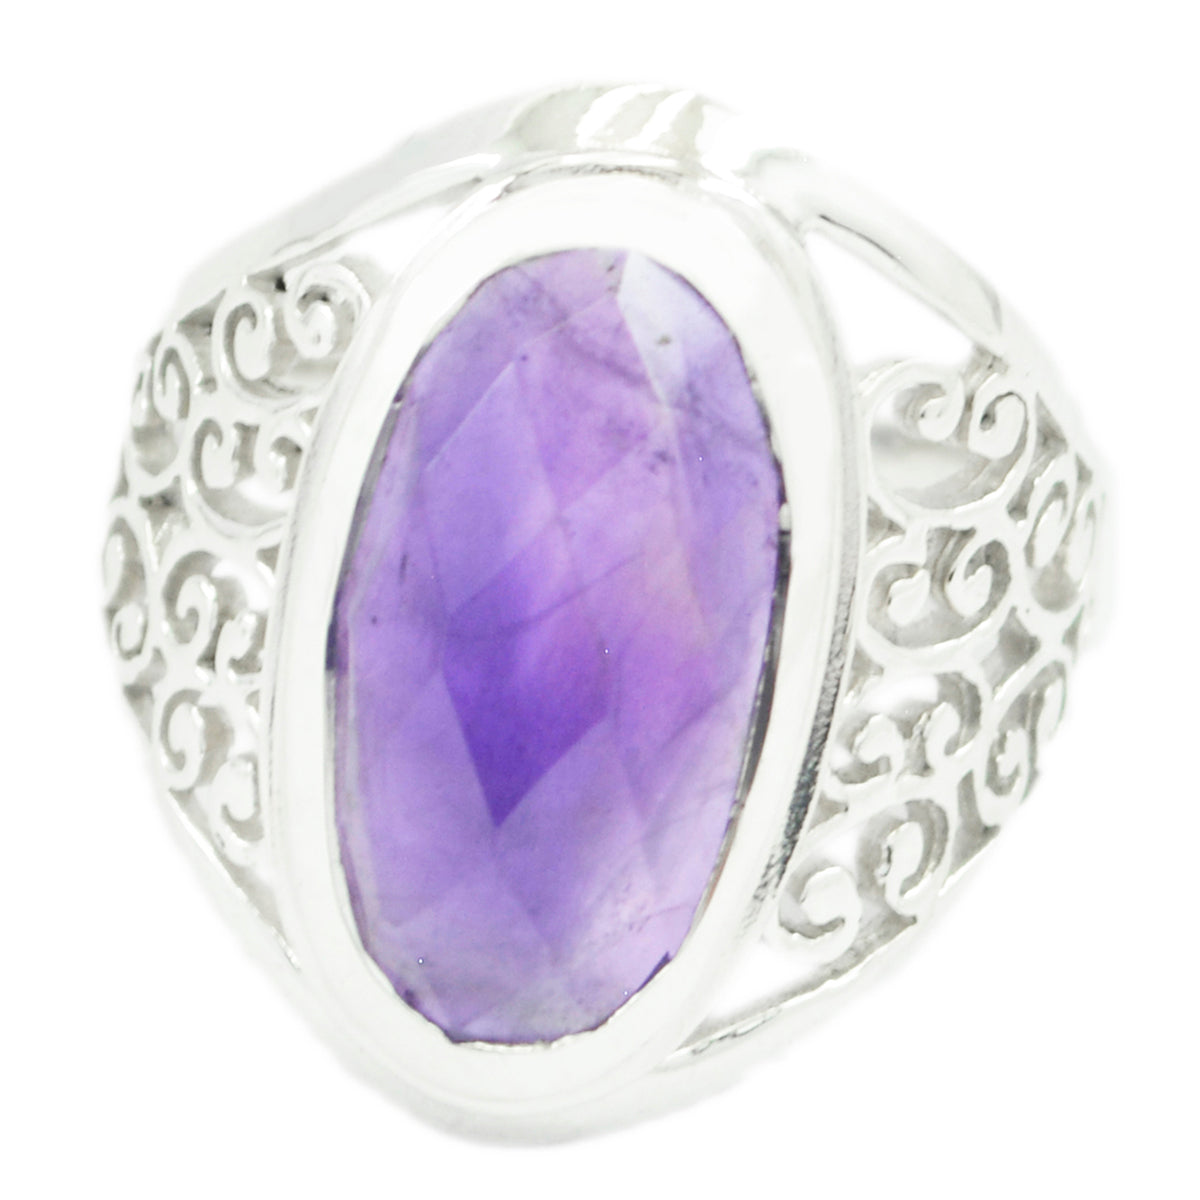 Wholesales Gem Amethyst Solid Silver Ring Alcoholics Anonymous Jewelry